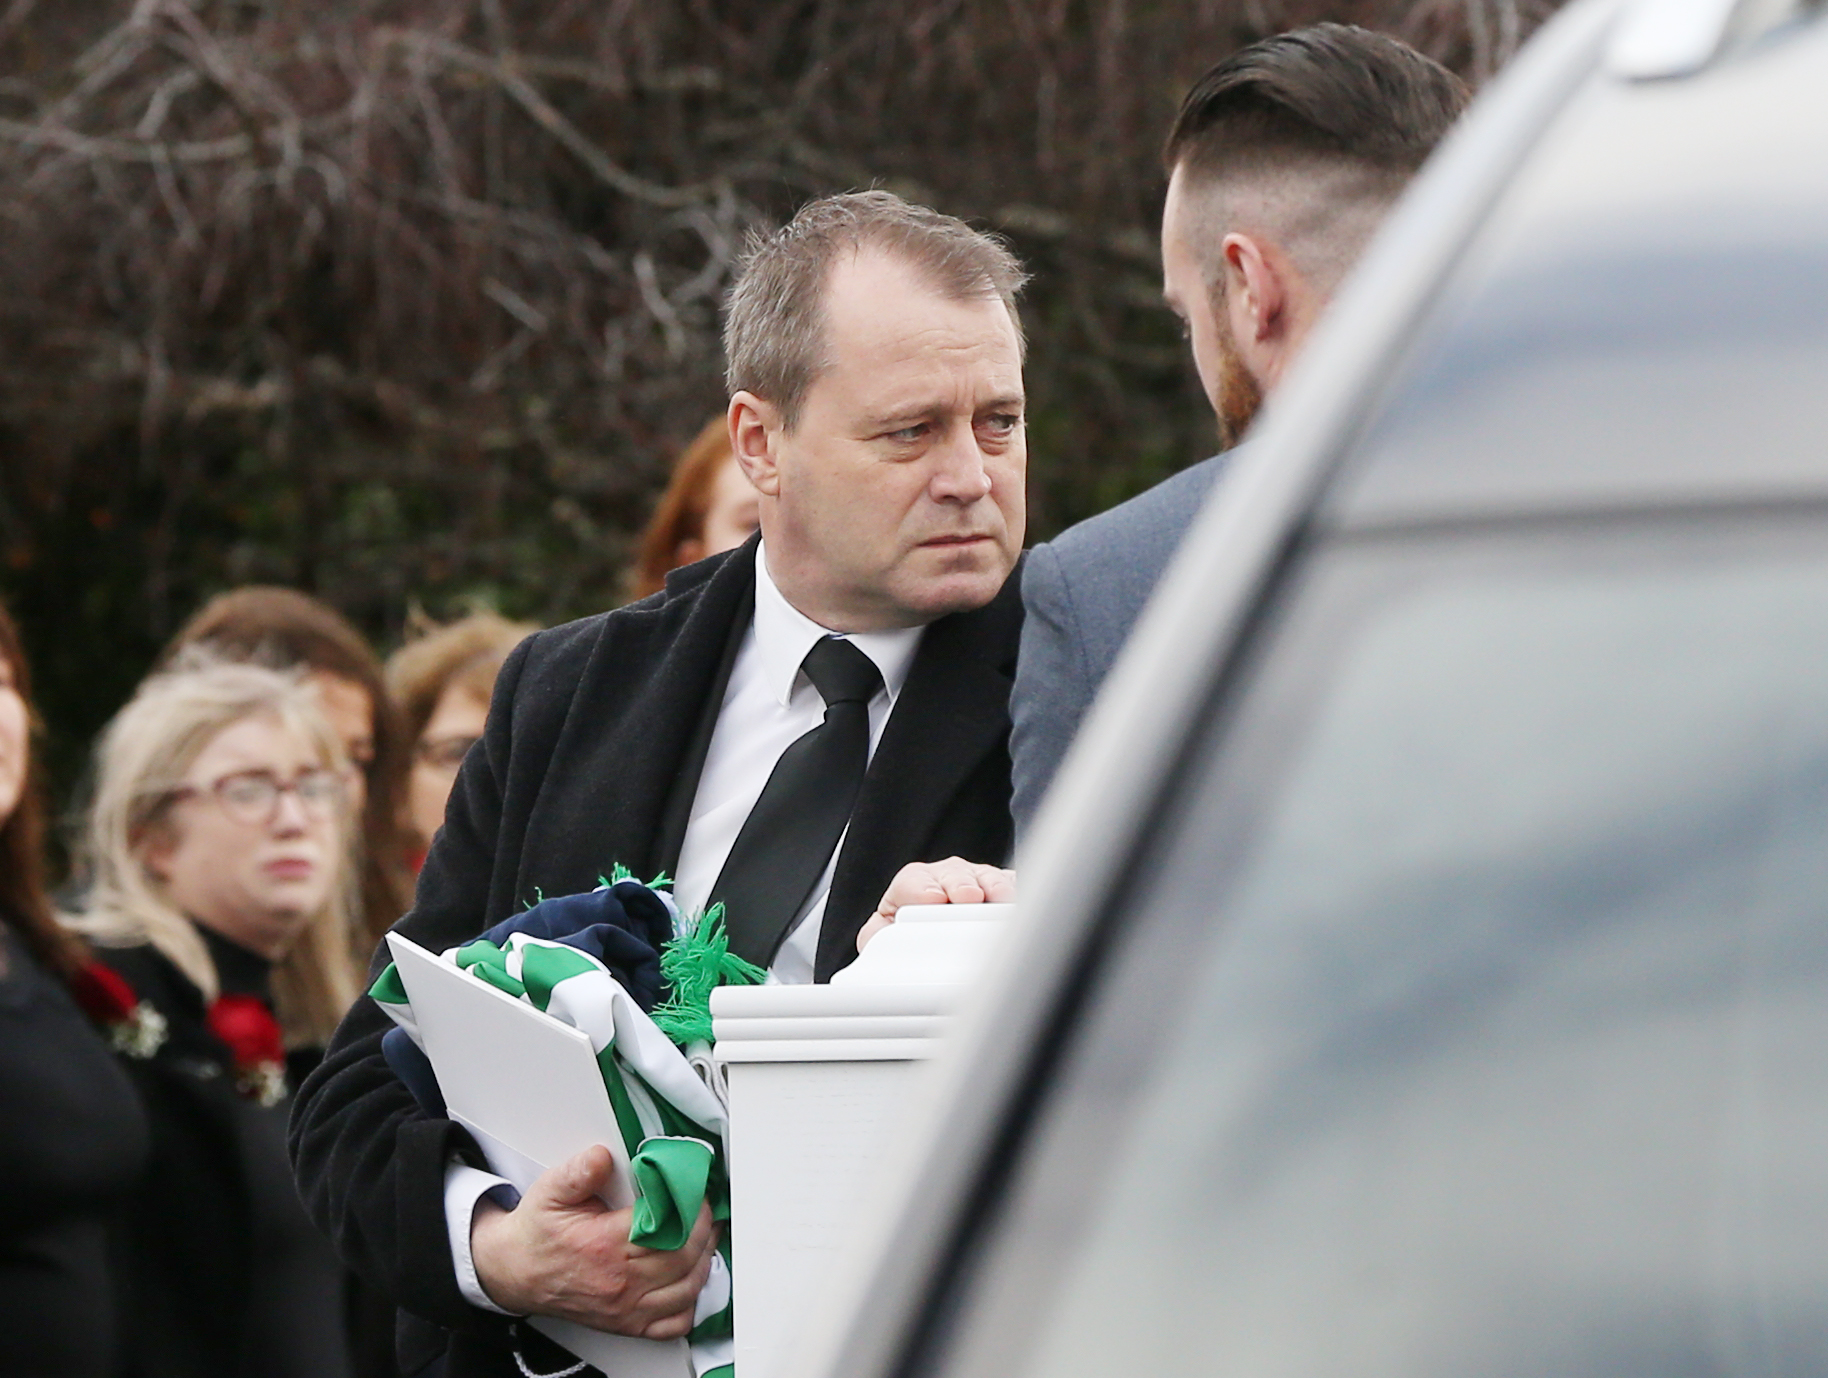 Andrew McGinley at the funeral mass for his children in January 2020